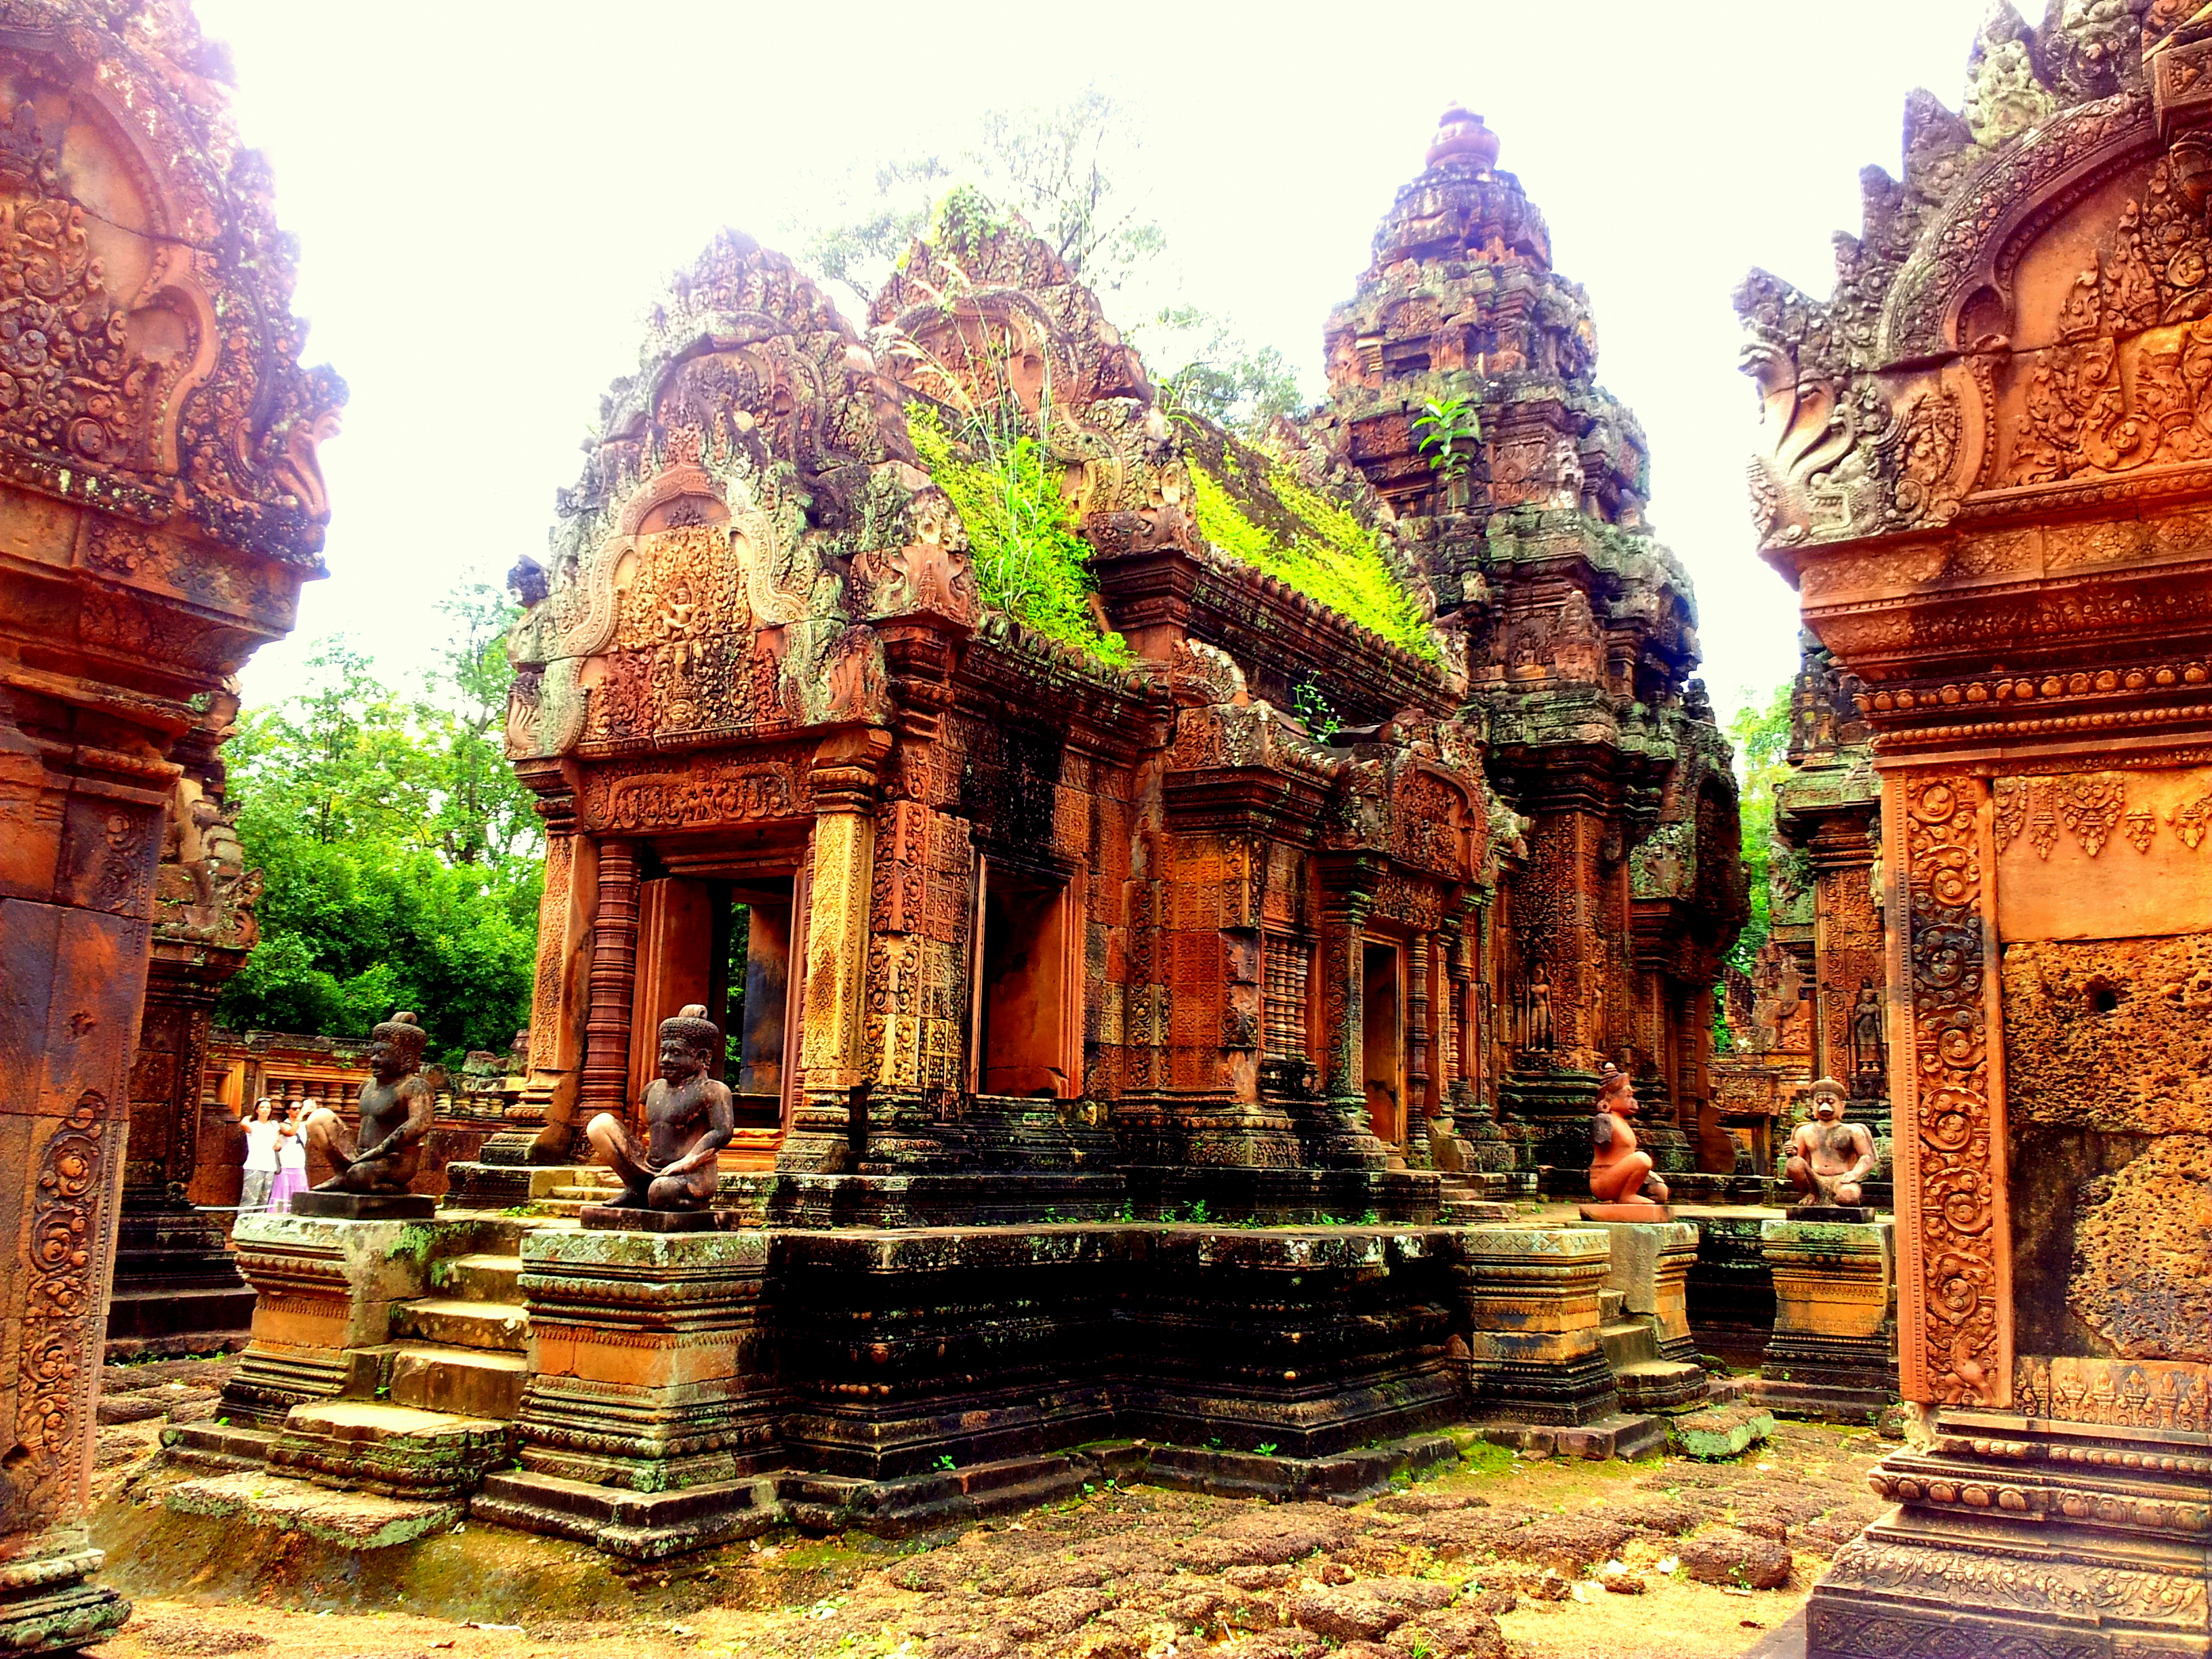 Cambodia diaries: Road to Banteay Srei and back